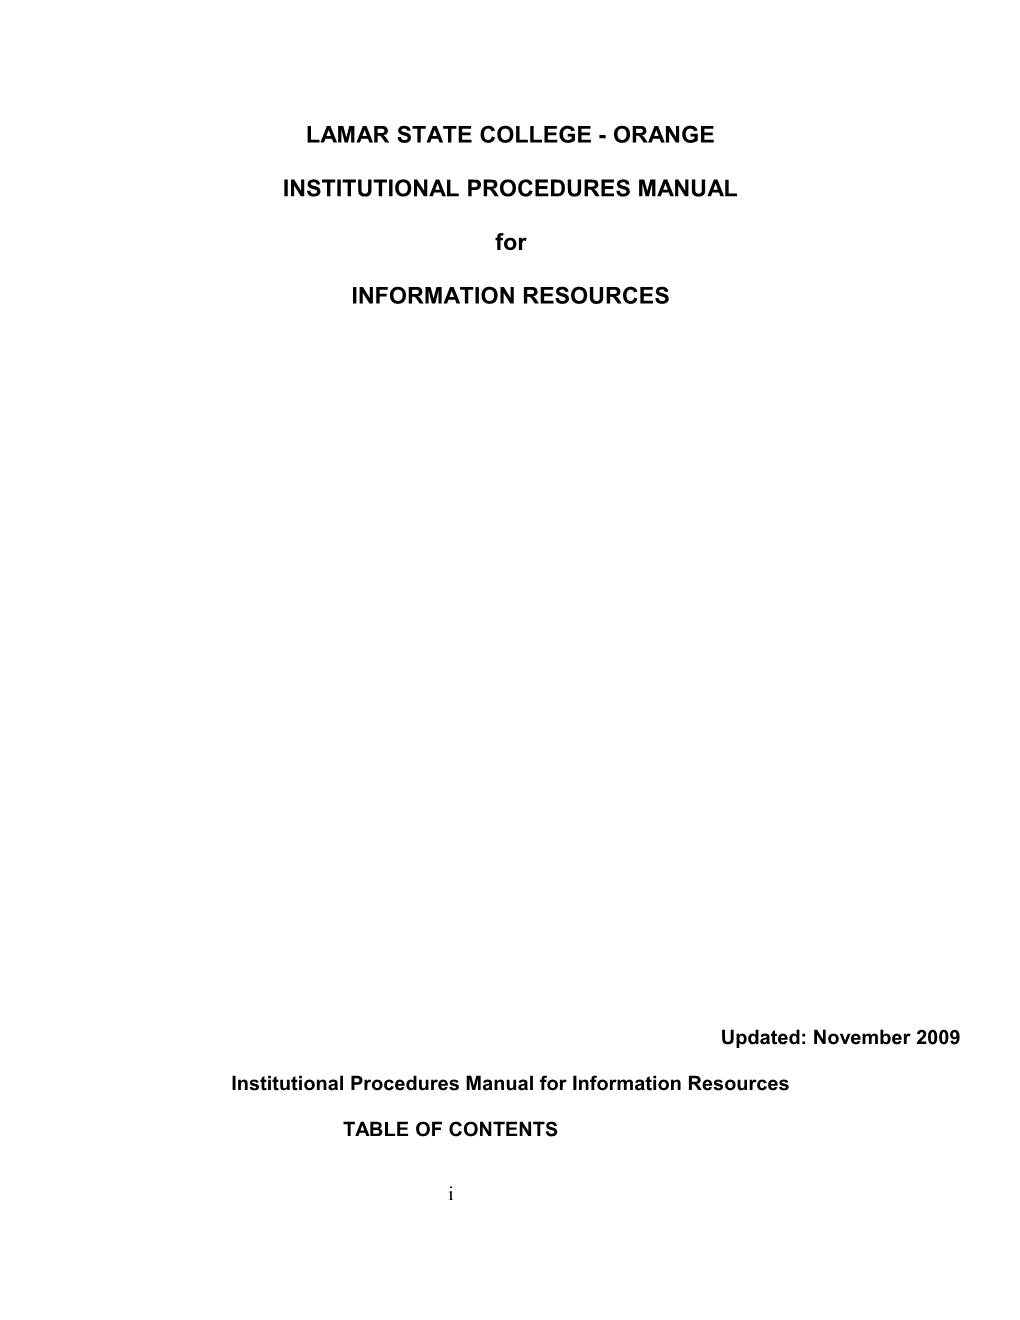 Institutional Policies and Procedures Manual